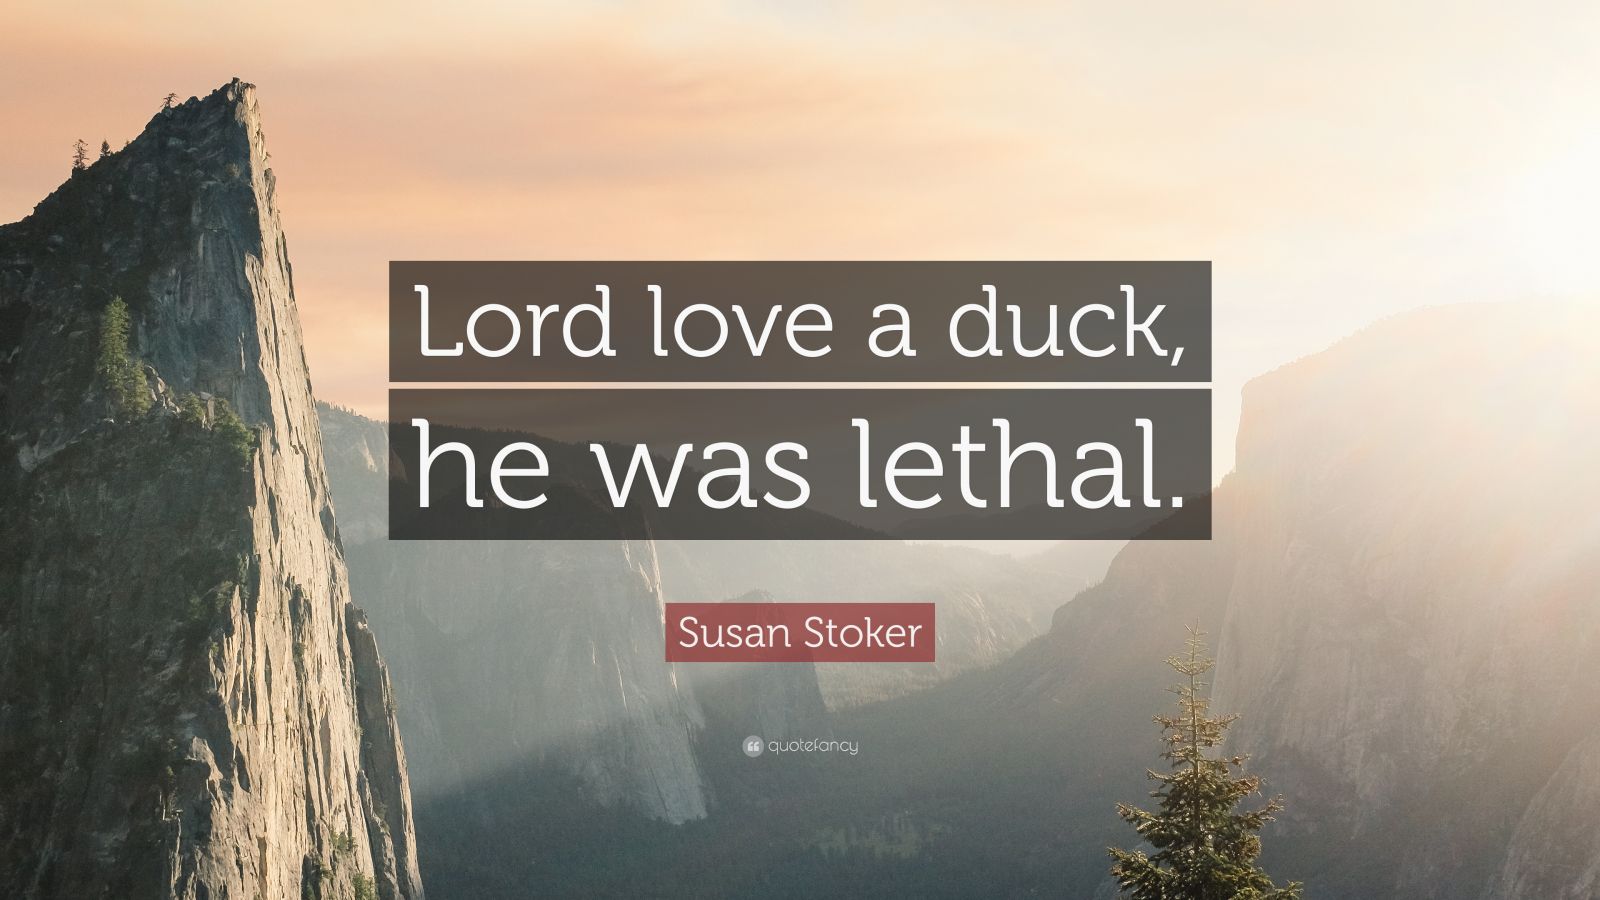 Susan Stoker Quote: “Lord love a duck, he was lethal.”